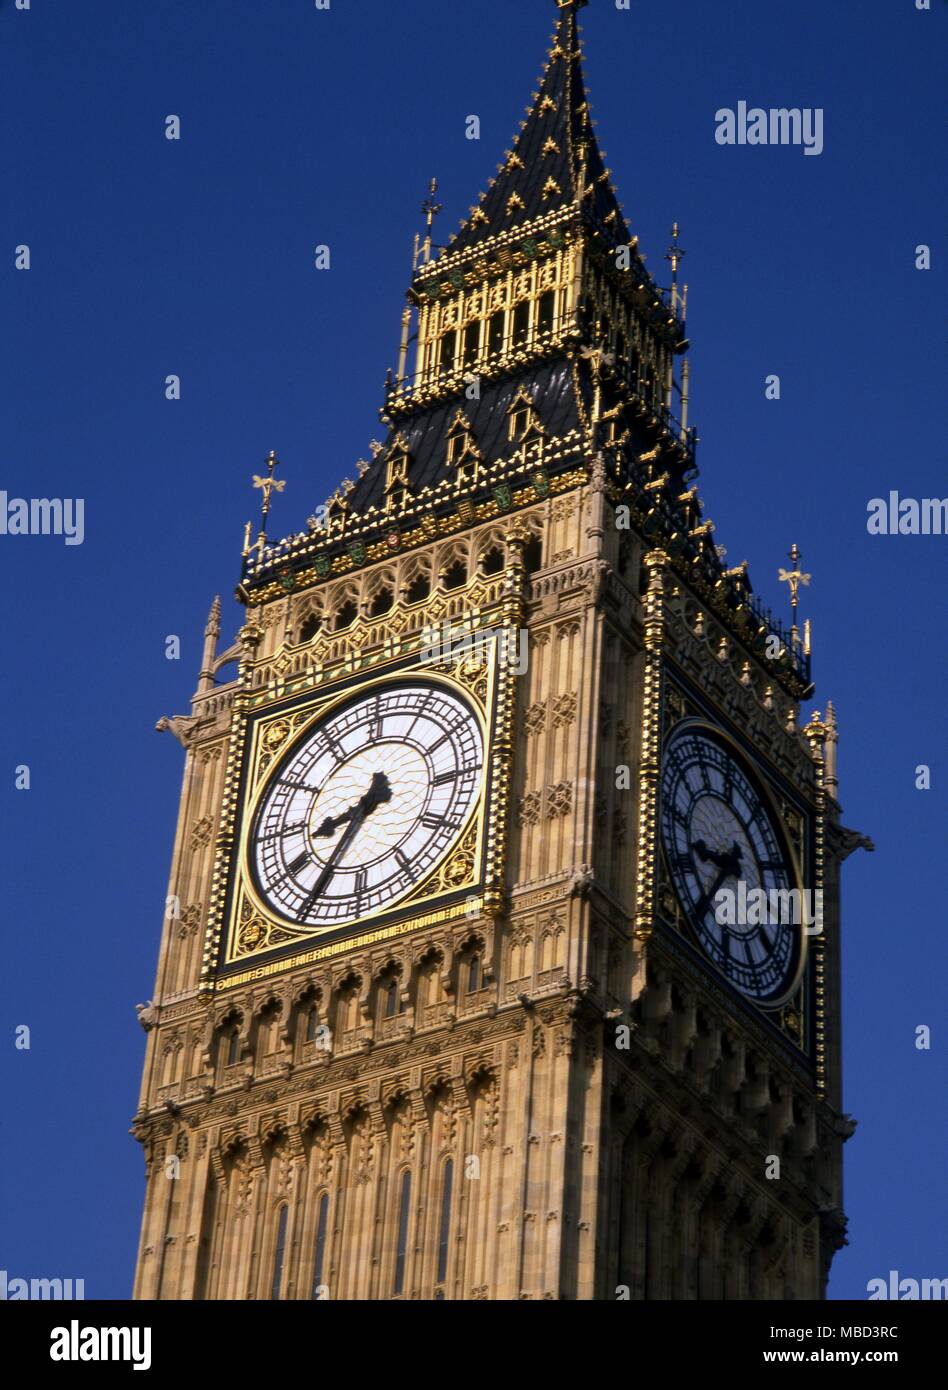 London - Westminster The clock face of Big Ben in the Tower at Westminster ©2006 Charles Walker / Stock Photo